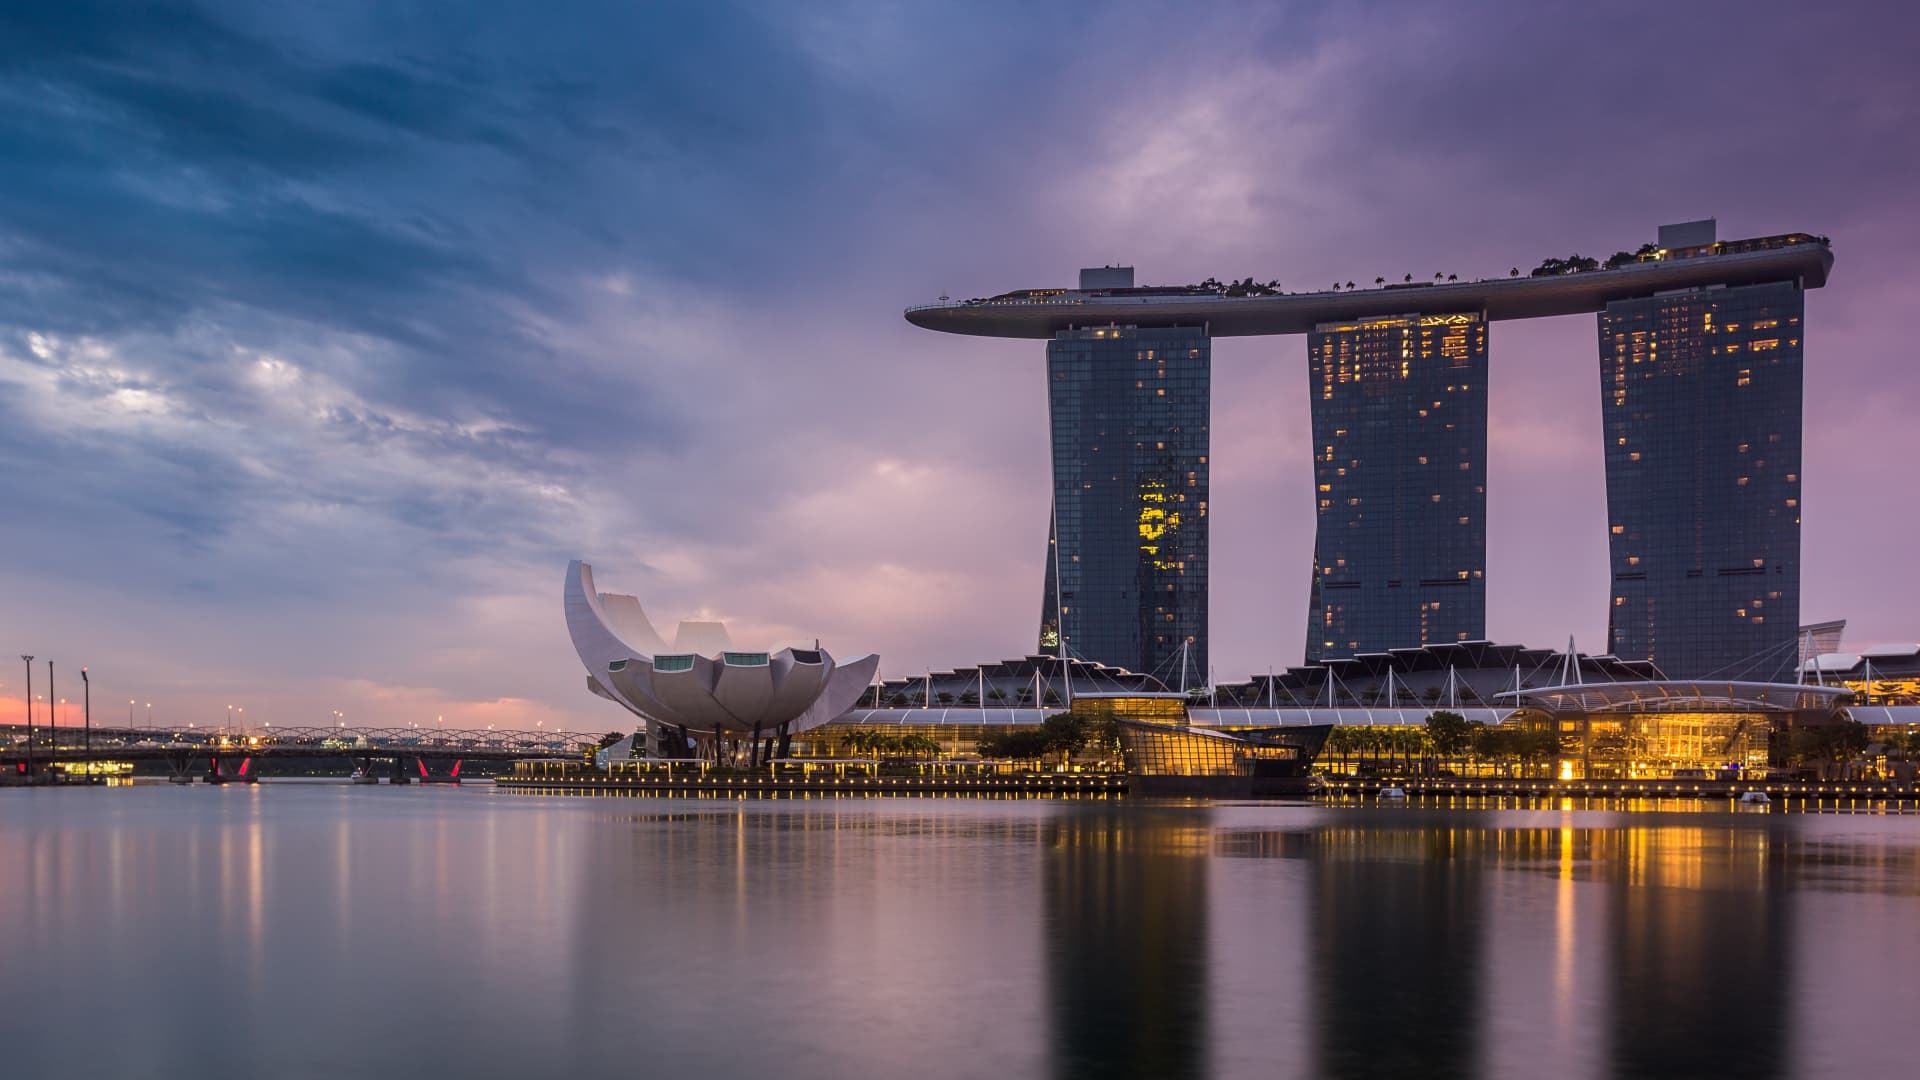 Singapore is now the world's freest economy, displacing Hong Kong after 53 years